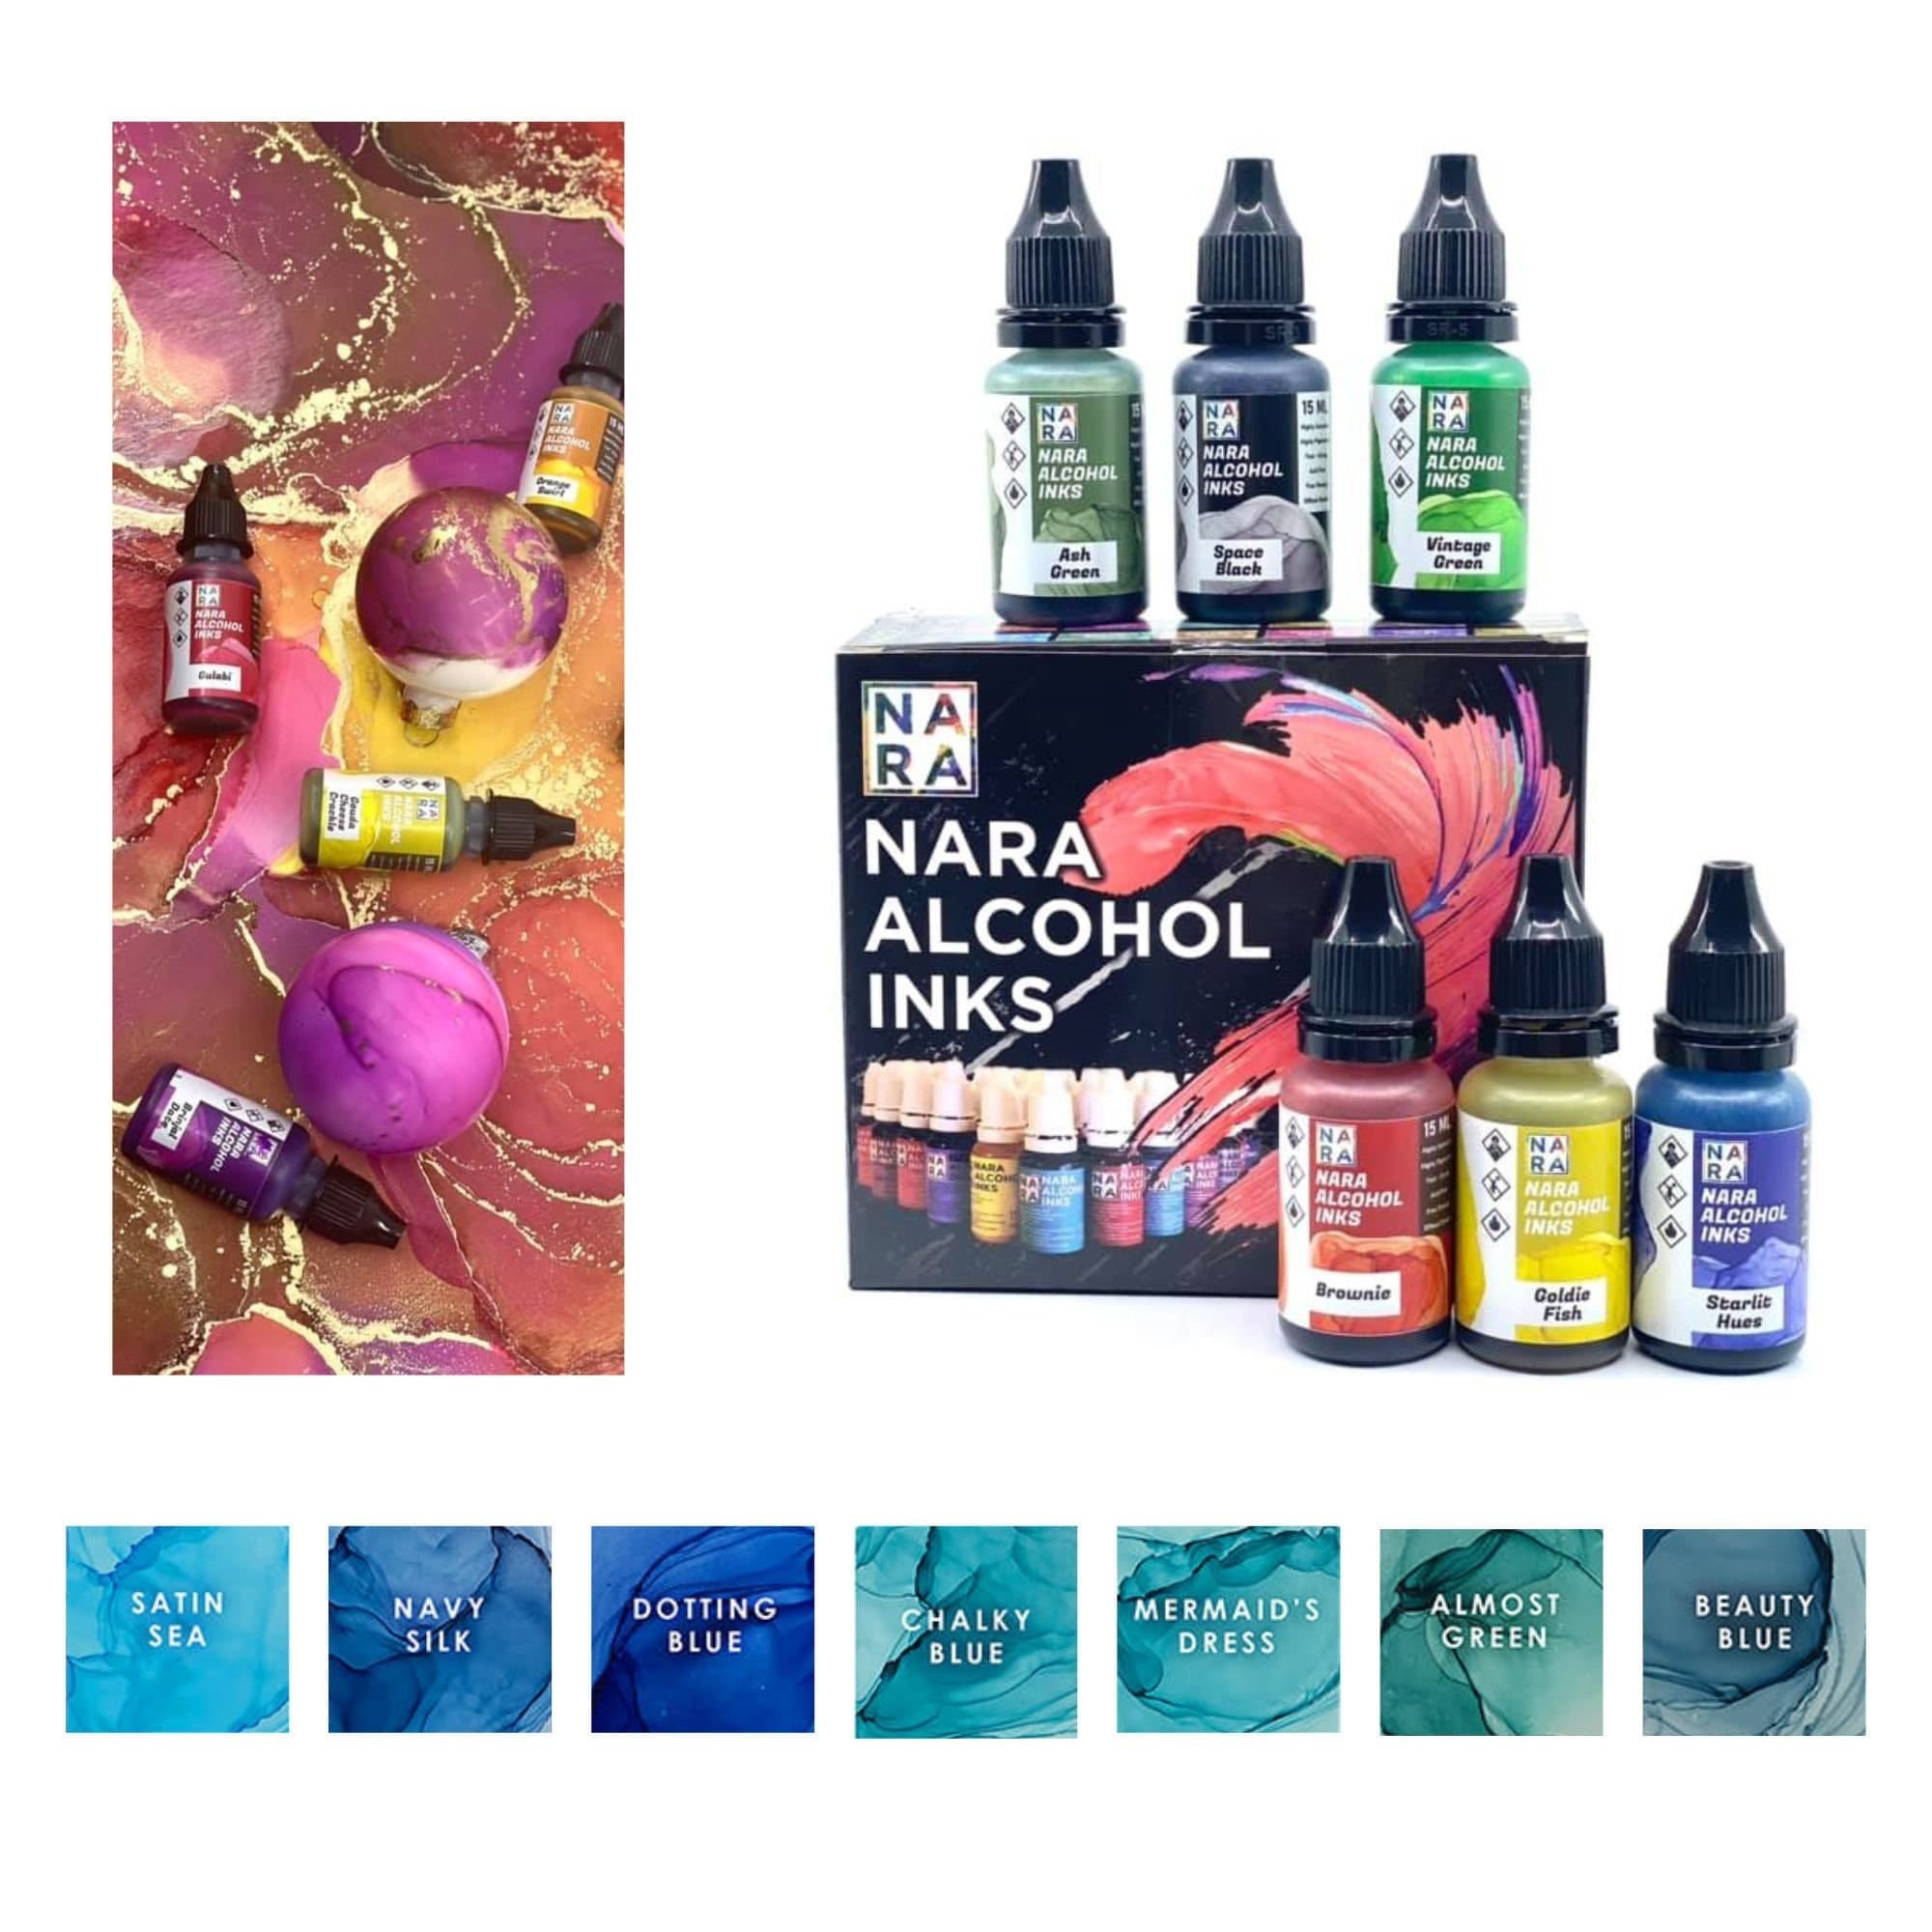 Alcohol Ink Set - 24 Highly Saturated Alcohol Inks - Acid-Free, Fast-Drying  and Permanent Alcohol-Based Inks - Versatile Alcohol Ink for Epoxy Resin,  Tumblers, Fluid Art Painting, Glass, Metal etc.